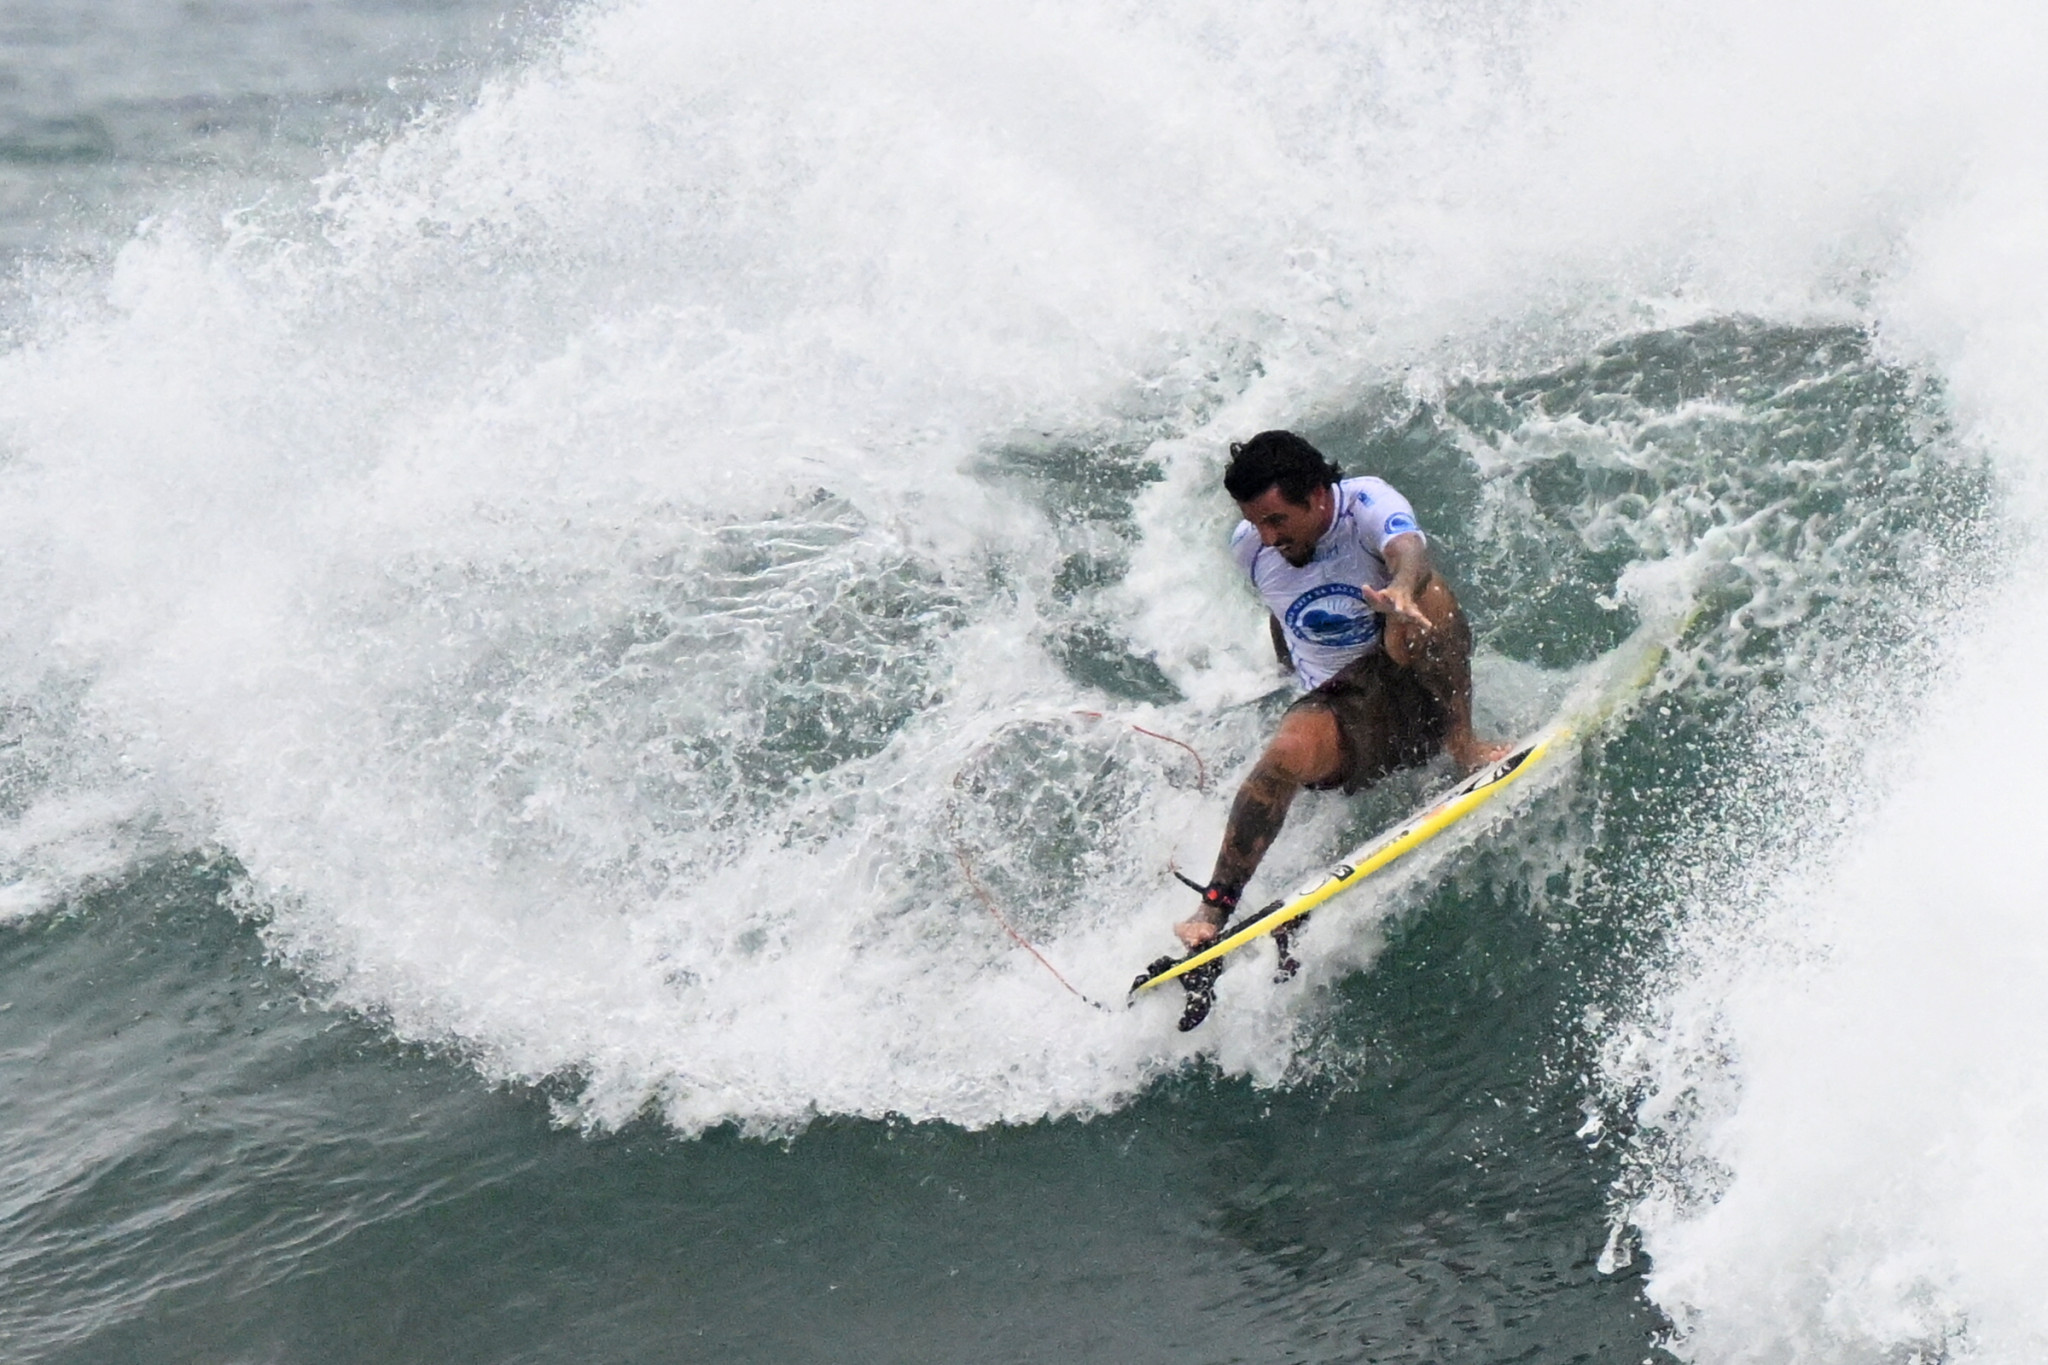 Toledo and Marks triumph at World Surf League in El Salvador